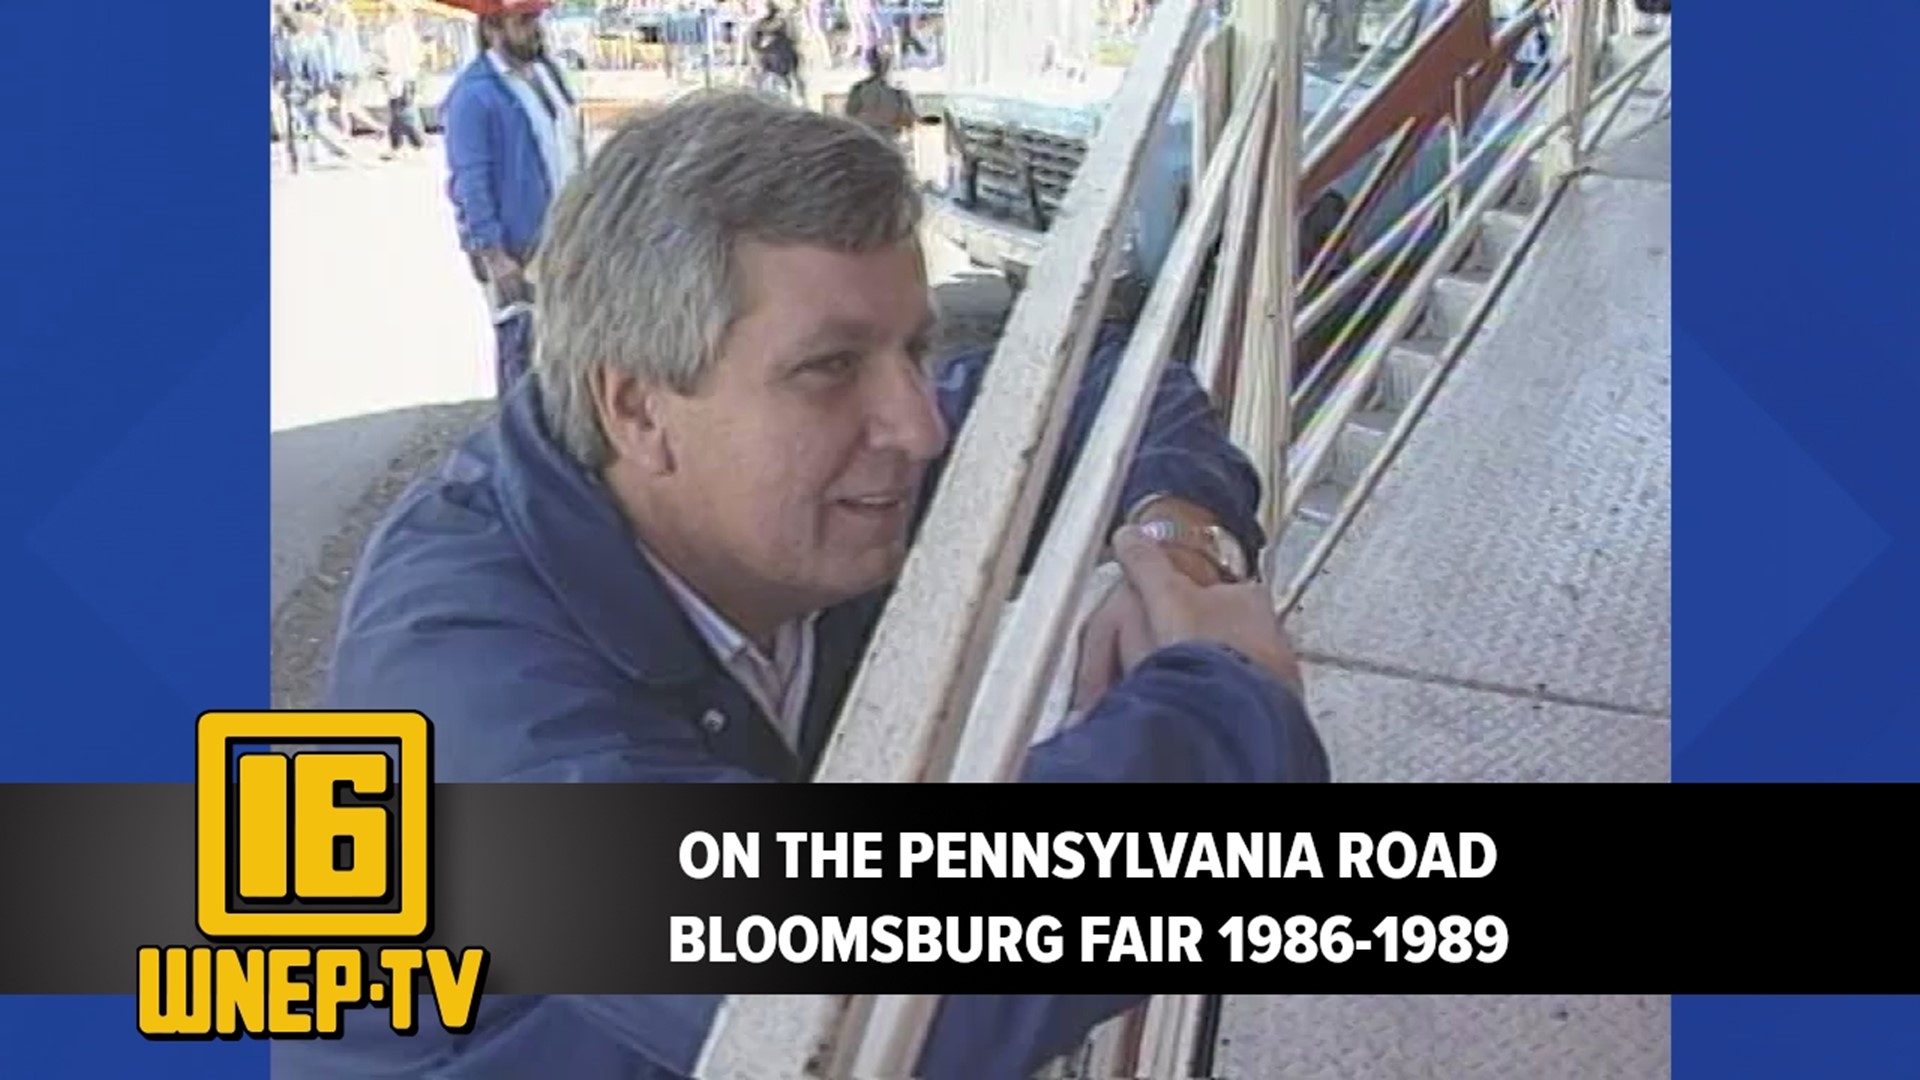 Join Mike Stevens as he takes the Pennsylvania road to the Bloomsburg Fair.